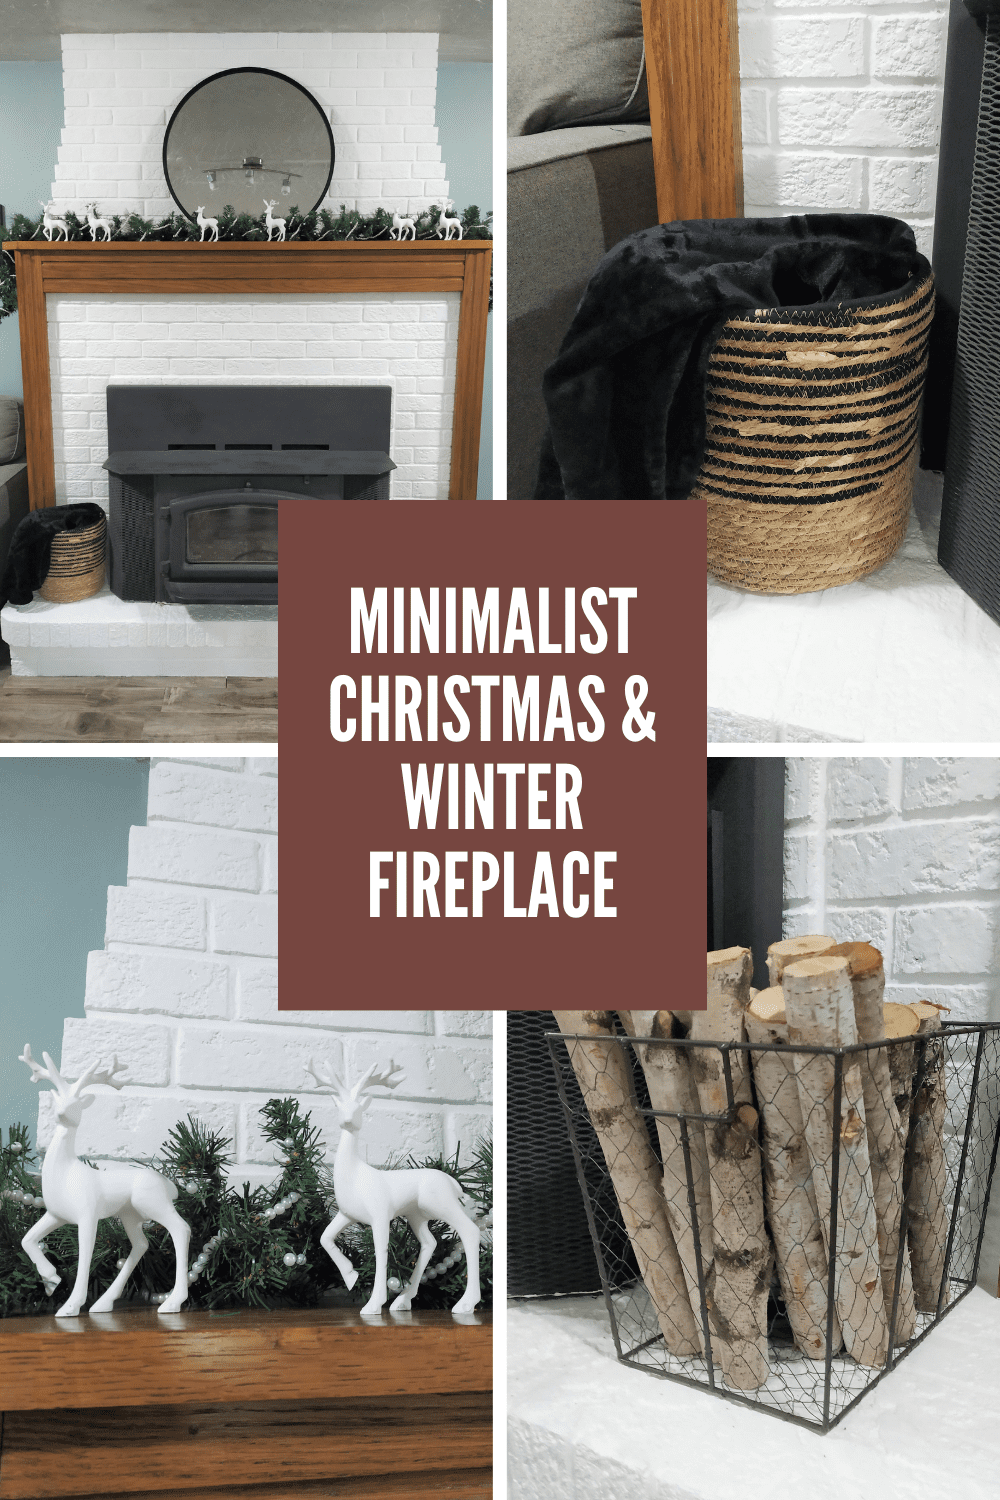 Collage of minimalist Christmas fireplace decorations with text overlay.